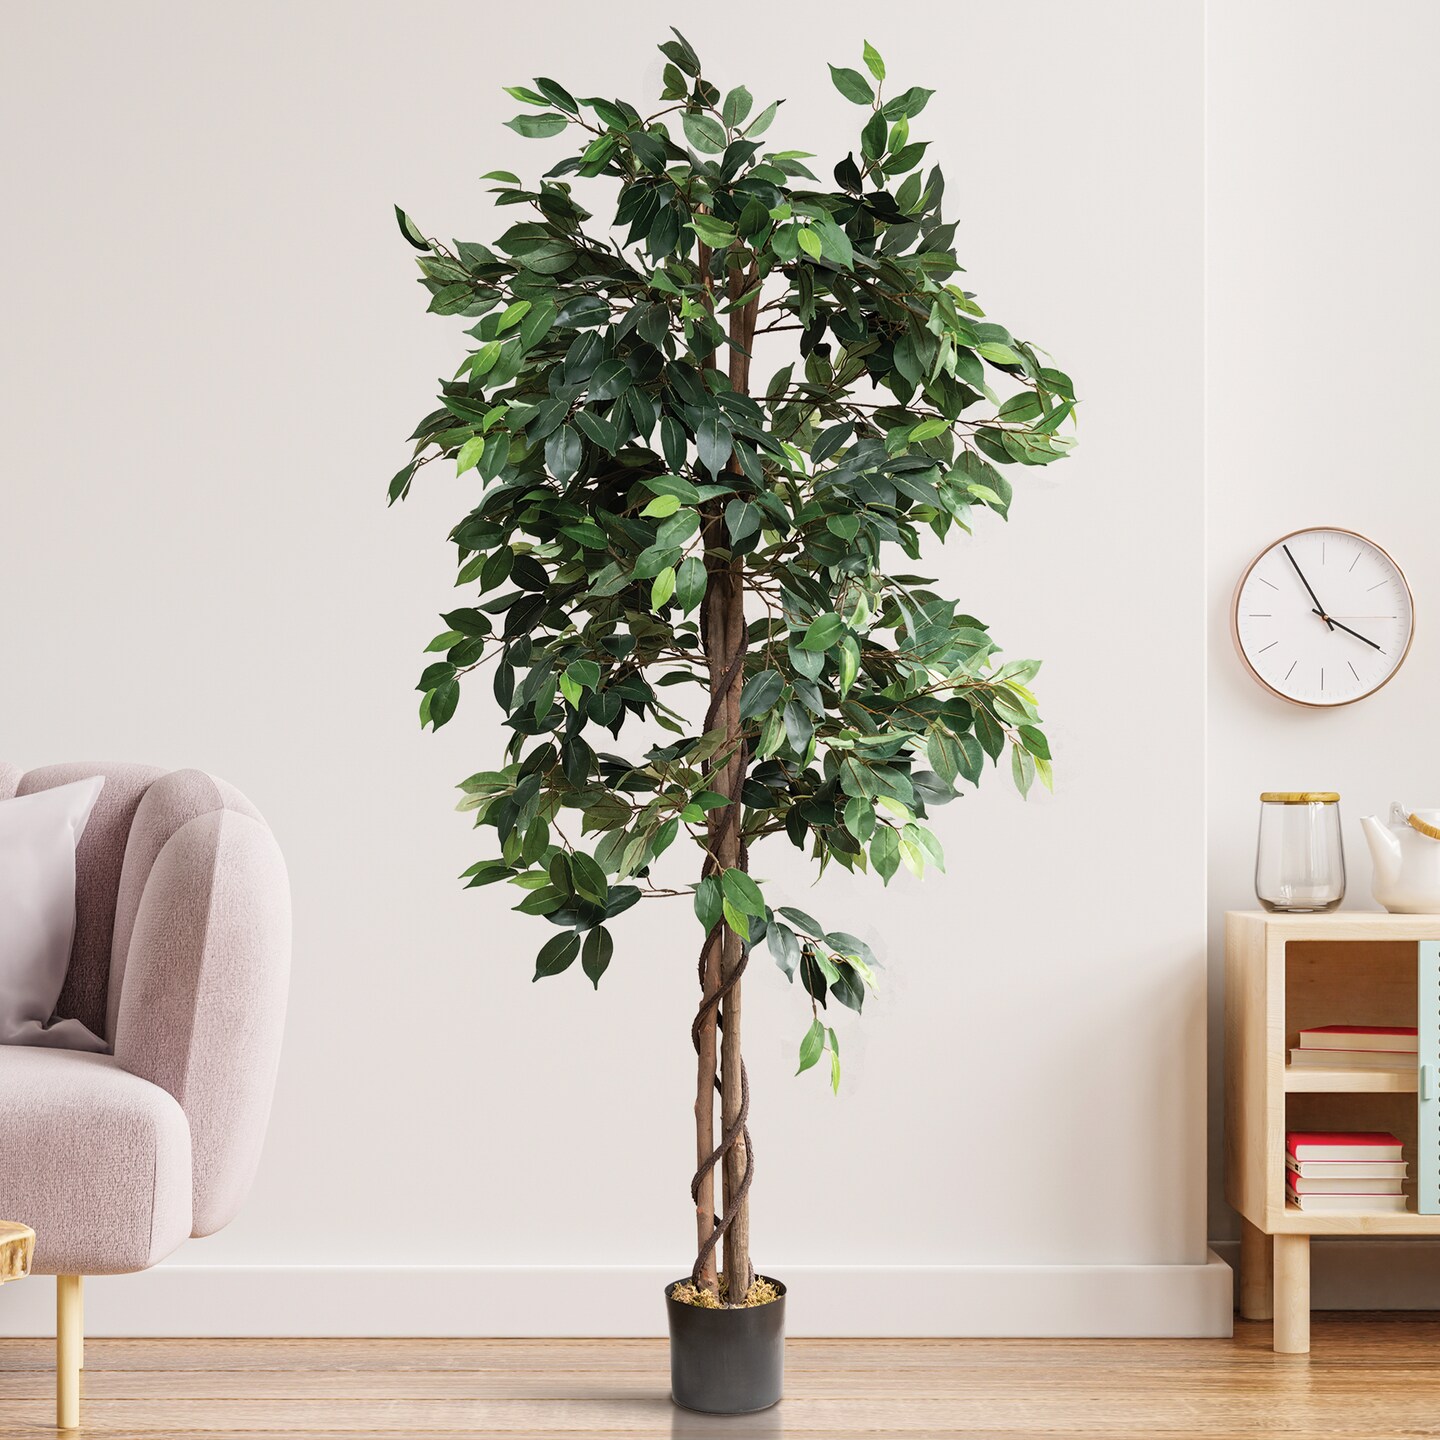 Artificial Trees for Home Decor Indoor - Fake Plants & Faux Plants ...